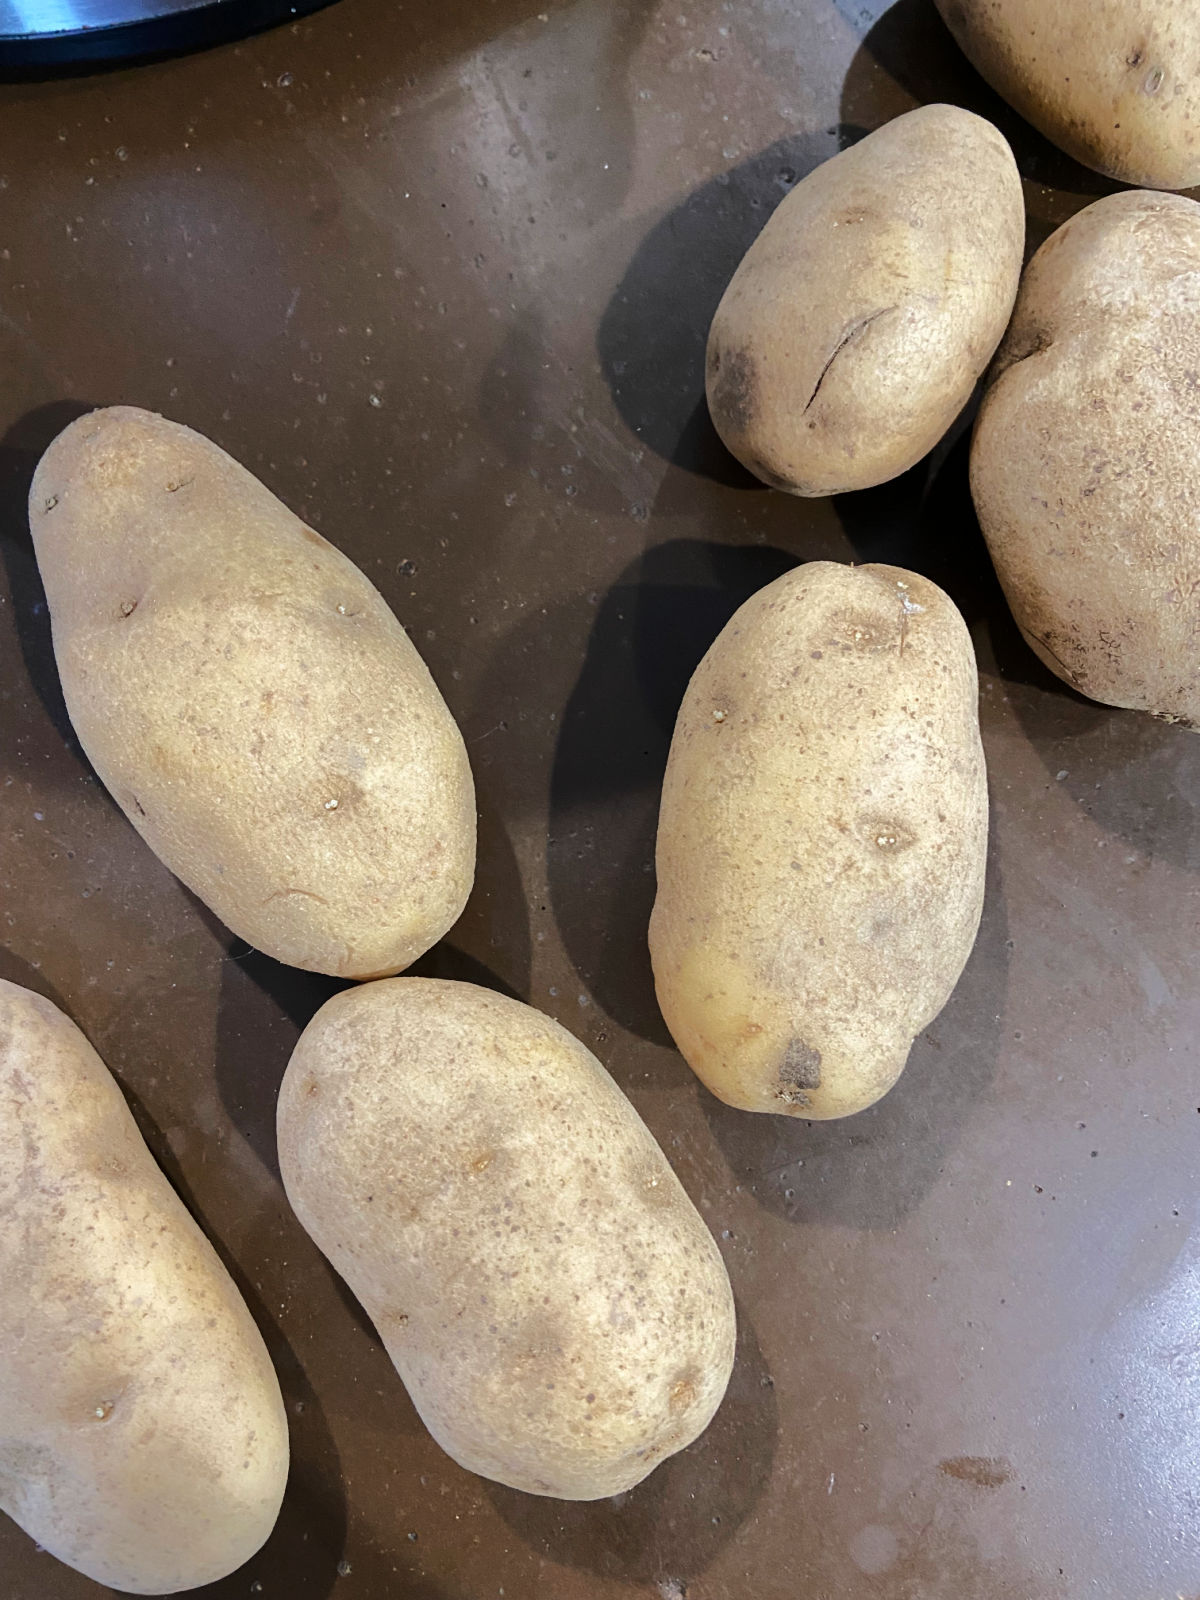 Unpeeled potatoes on the counter.